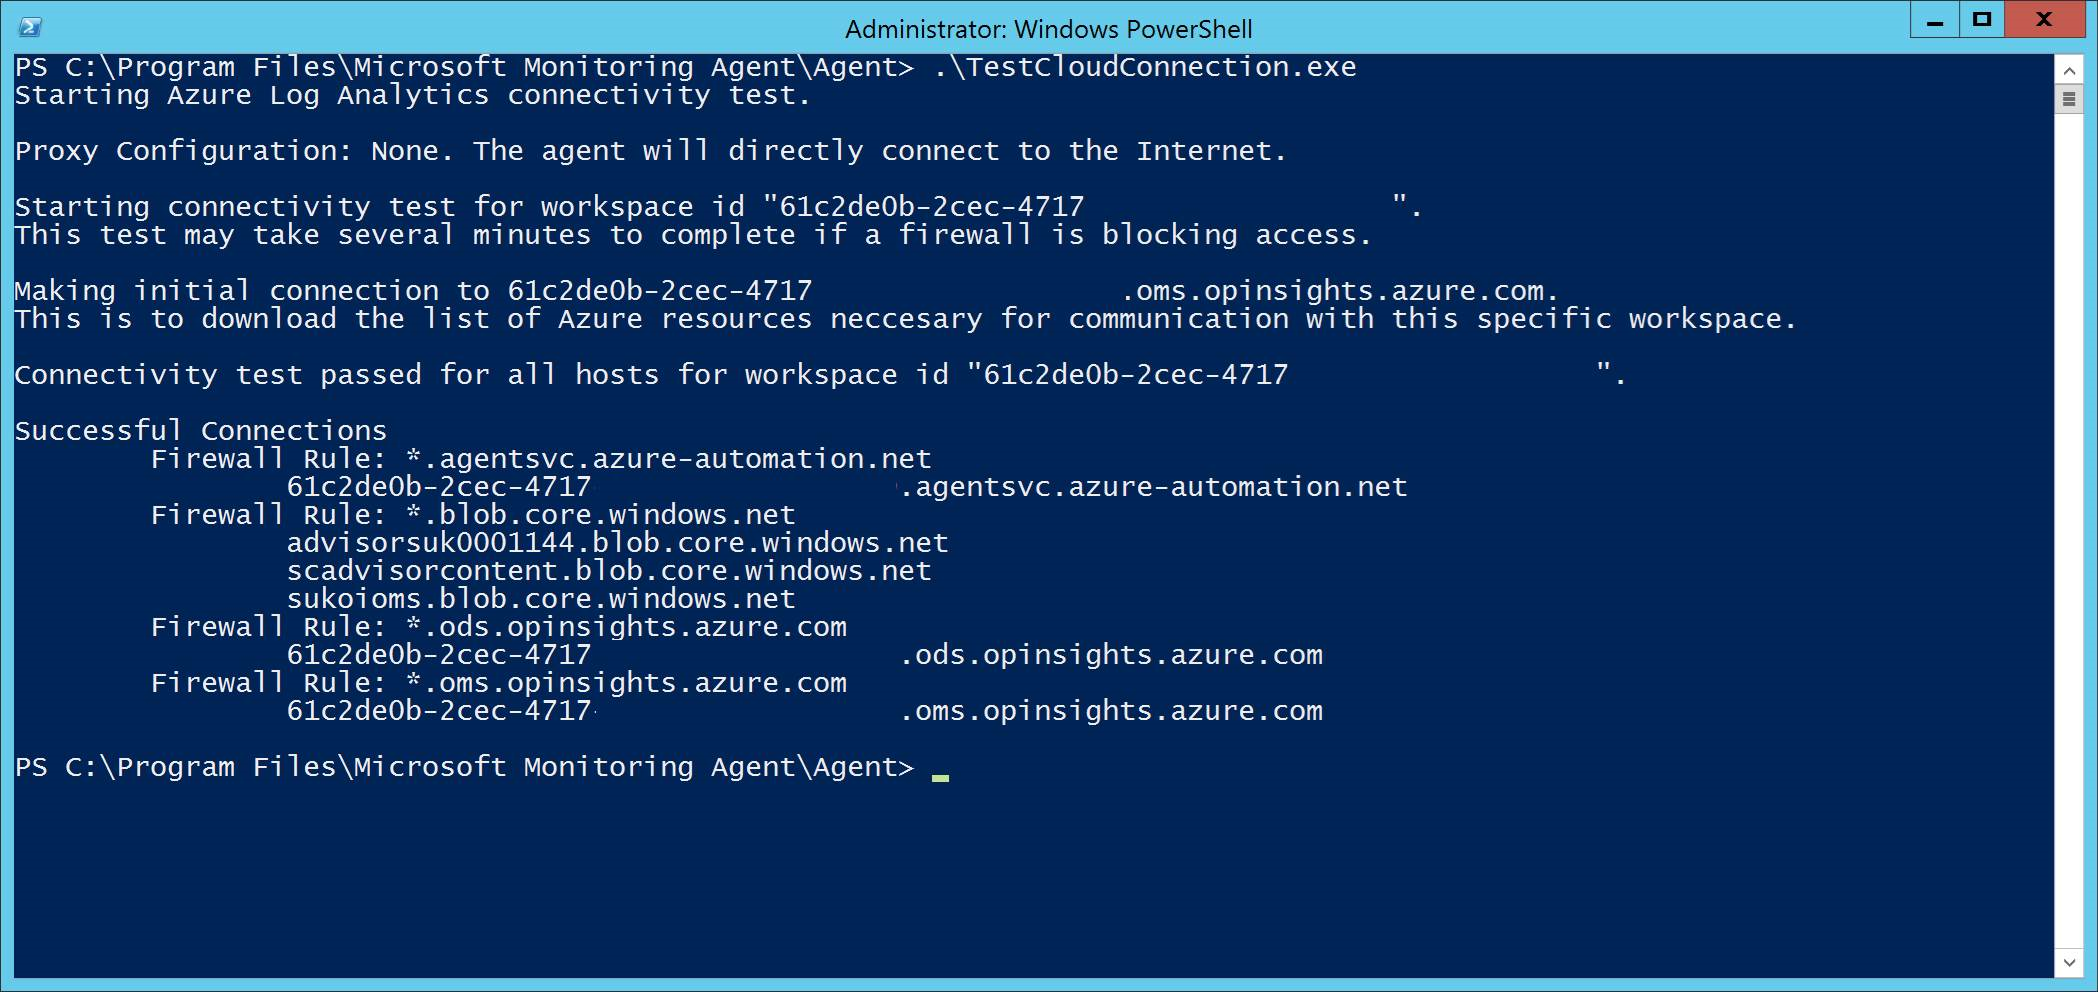 Image of administrator in Windows PowerShell.